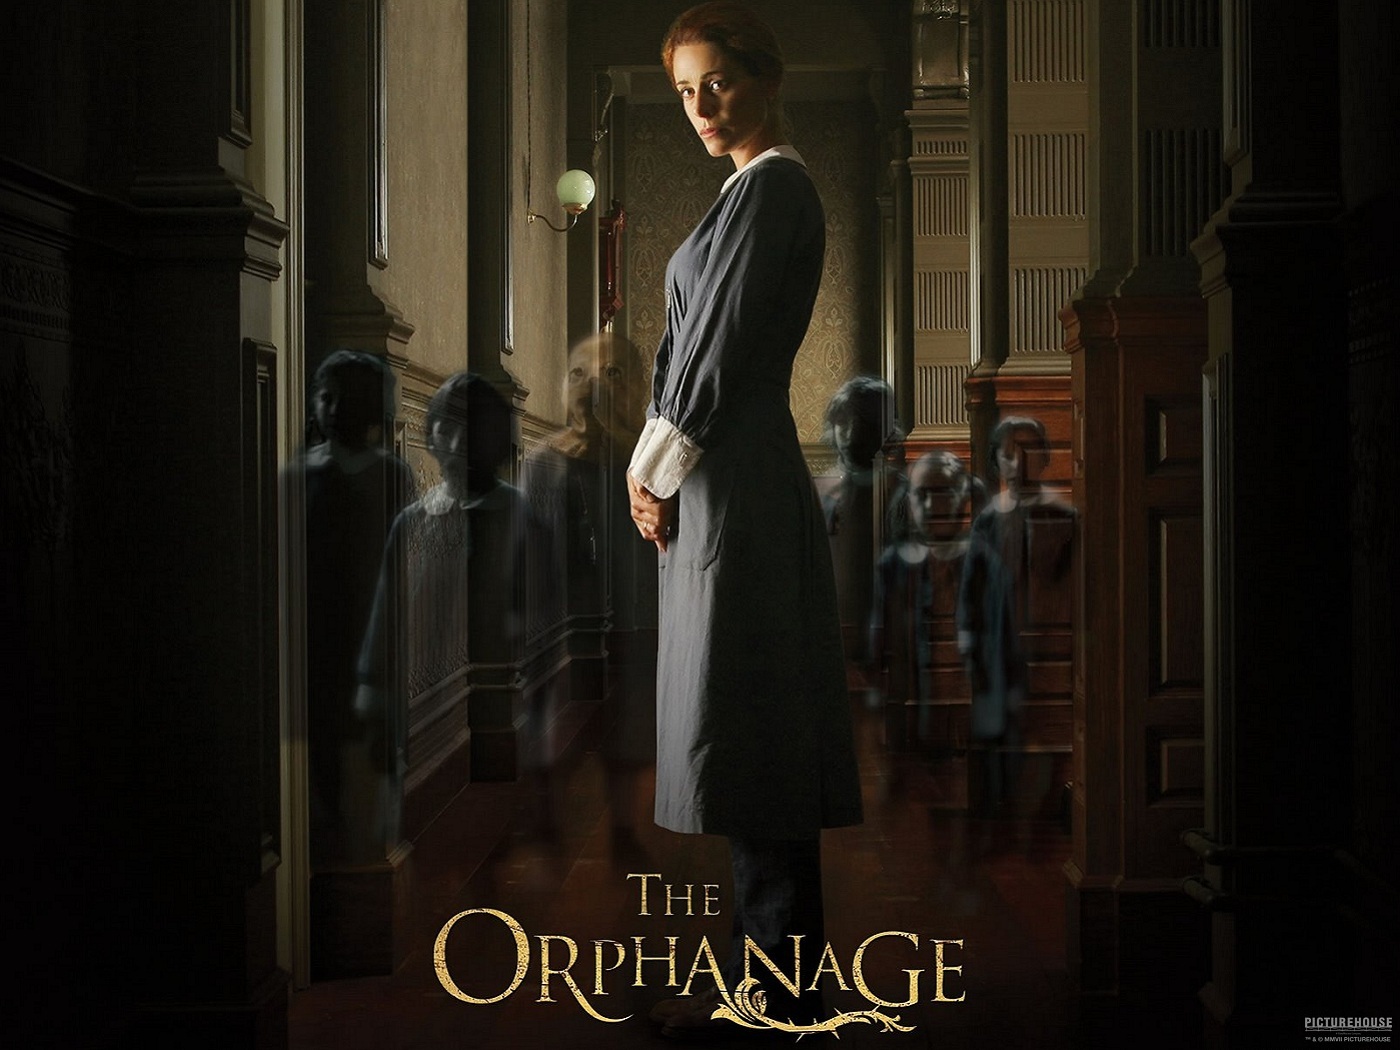 Movie The Orphanage (2007) HD Wallpaper | Background Image